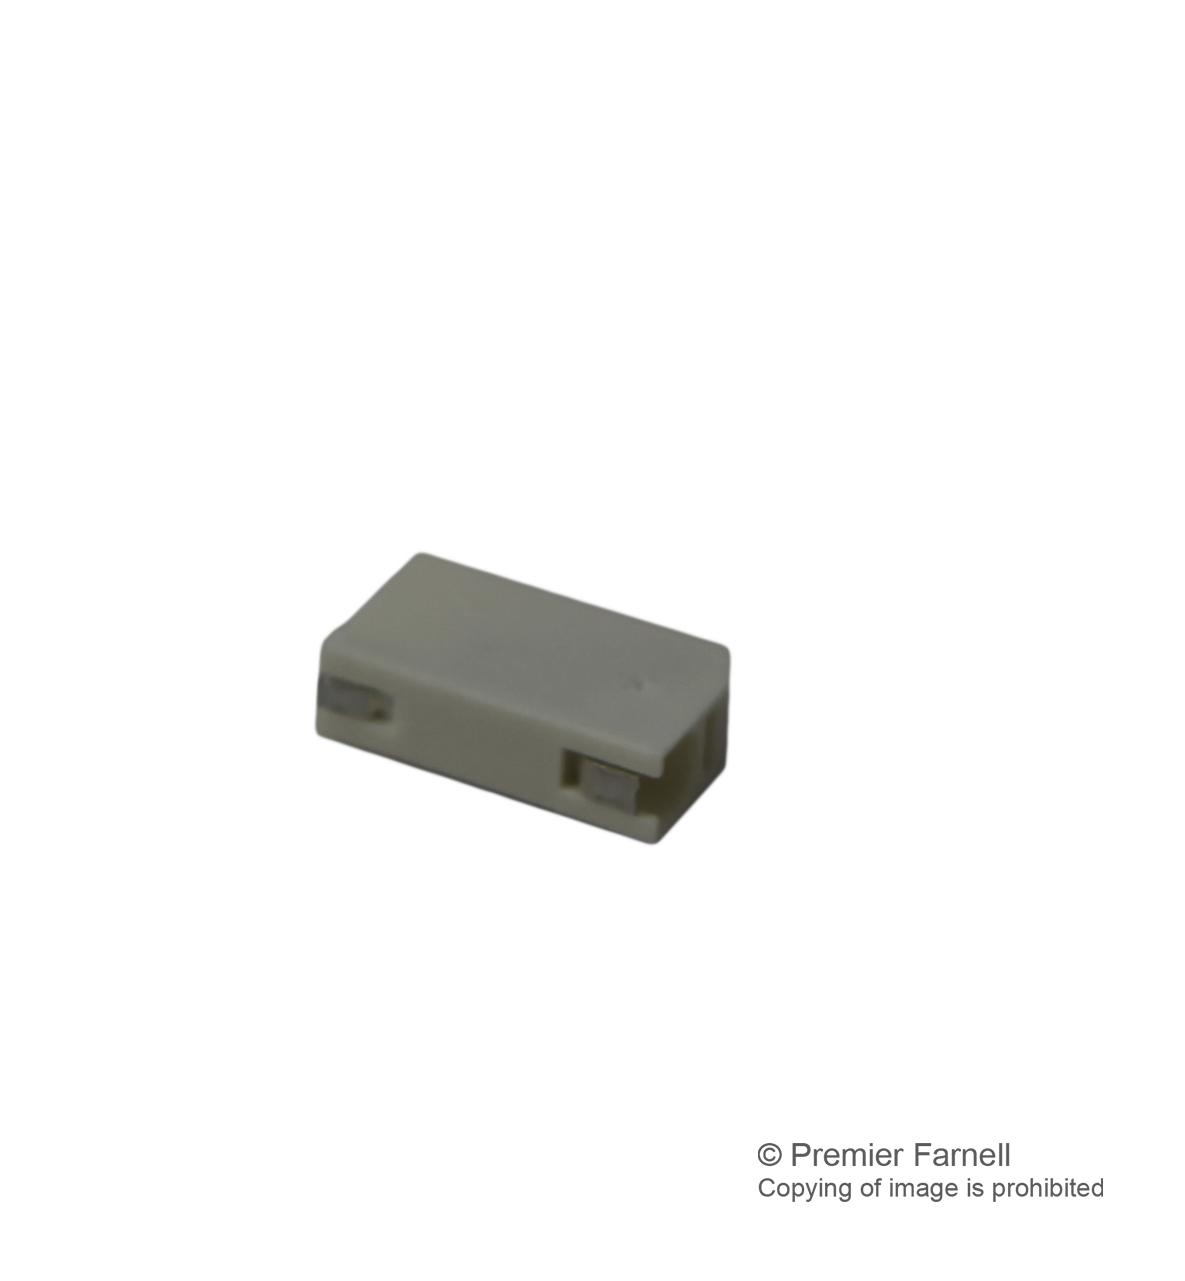 009276006021106 CONNECTOR, IDC, 6 WAY, 18 AWG AVX INTERCONNECT